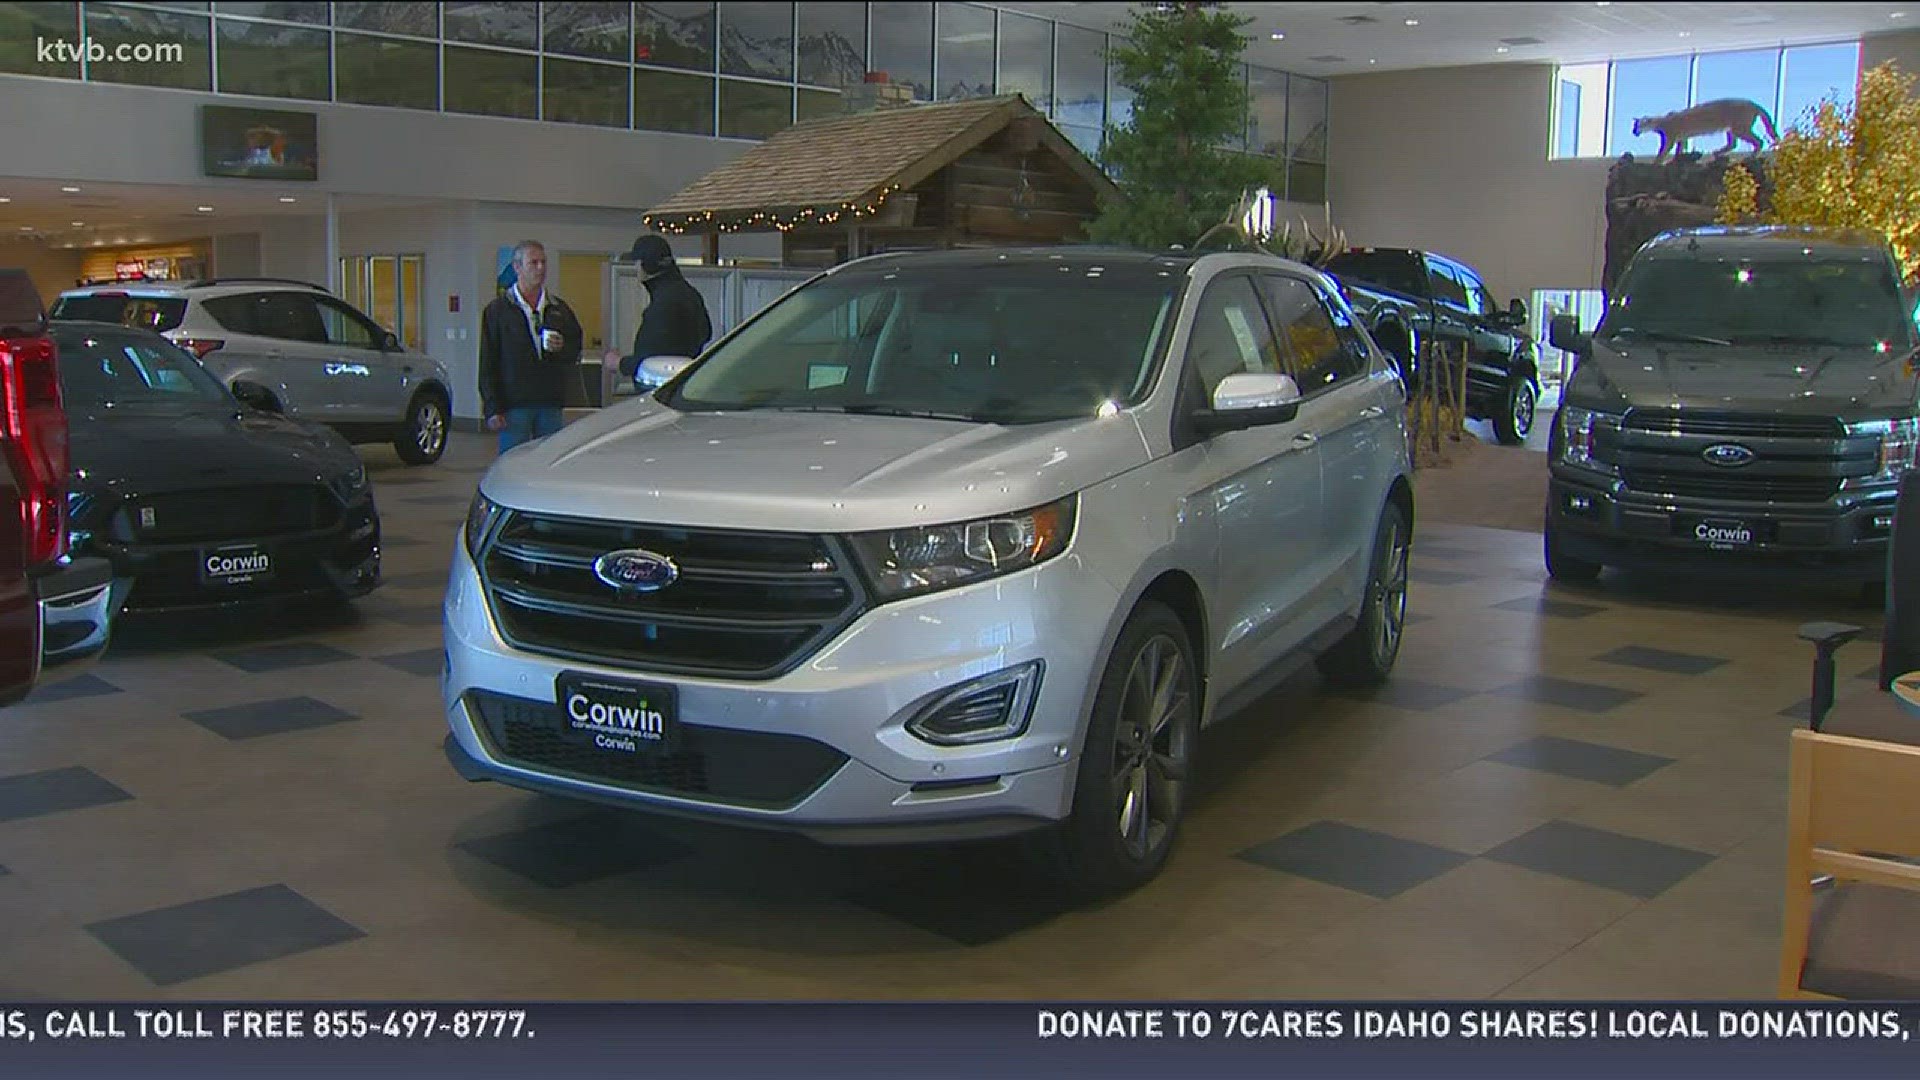 Corwin Ford: A company that cares